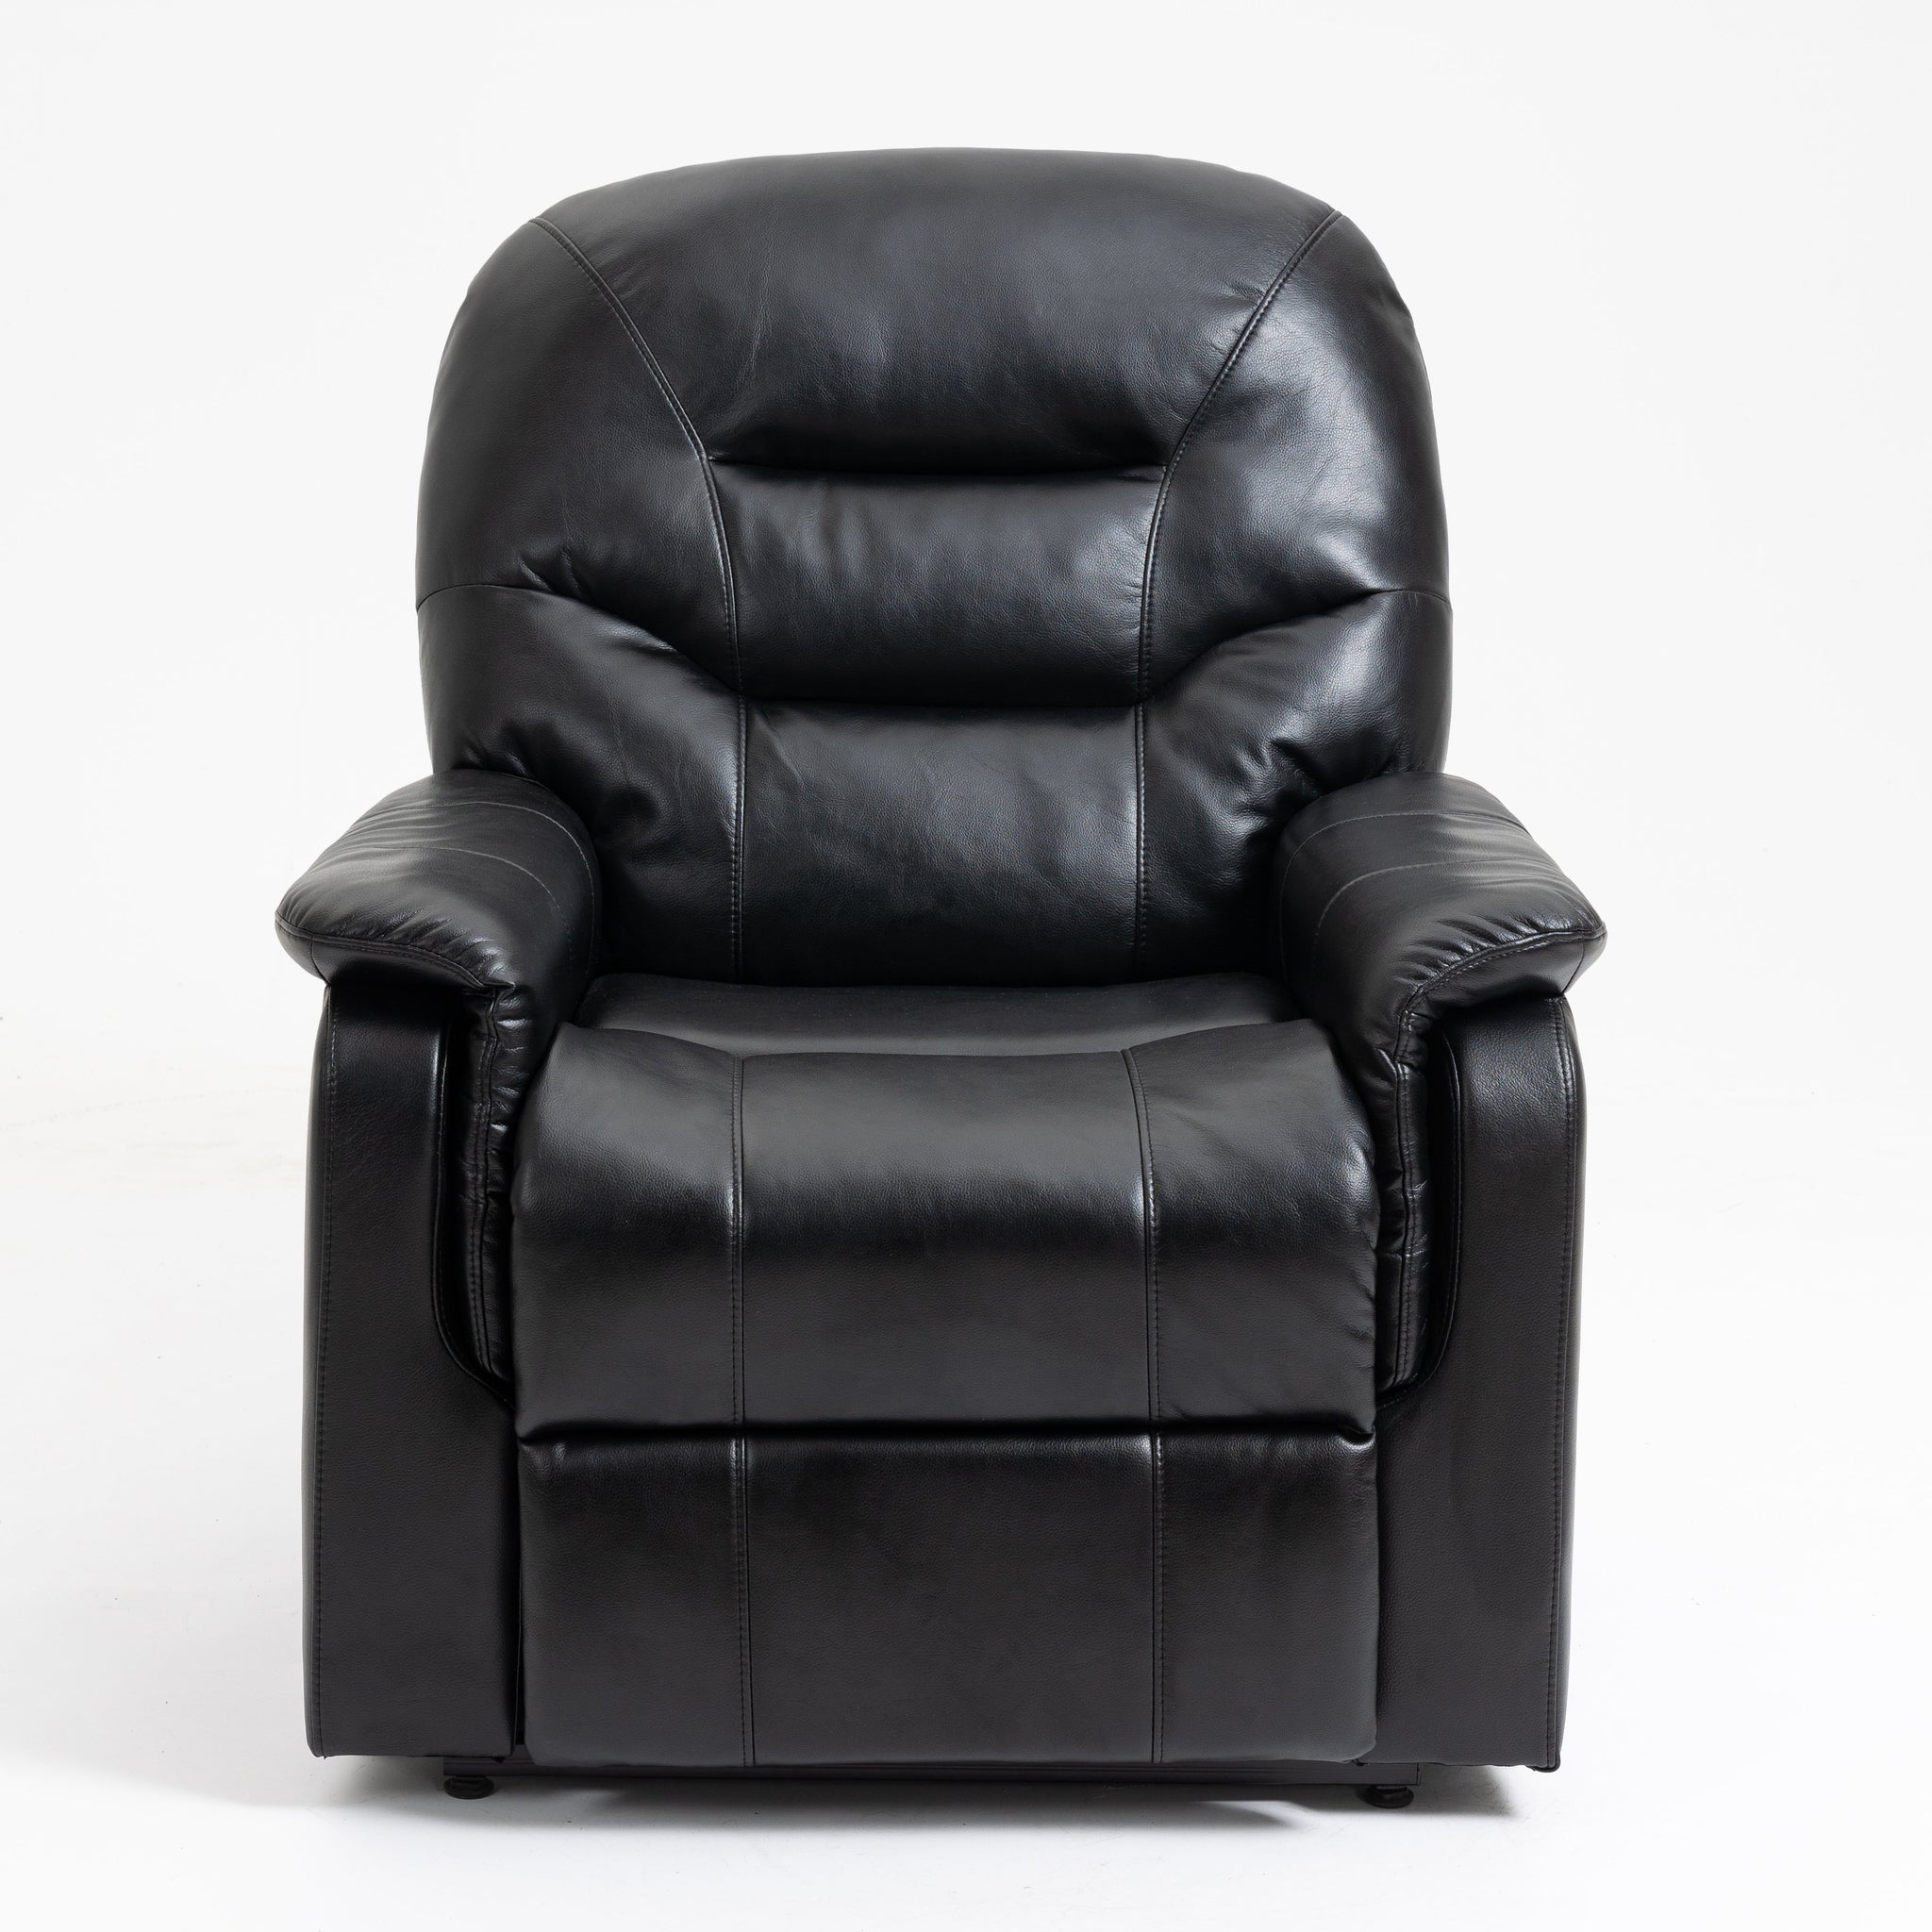 Ergonomic Faux Leather Power Lift Recliner Chair for Elderly with Side Pocket and Remote Control